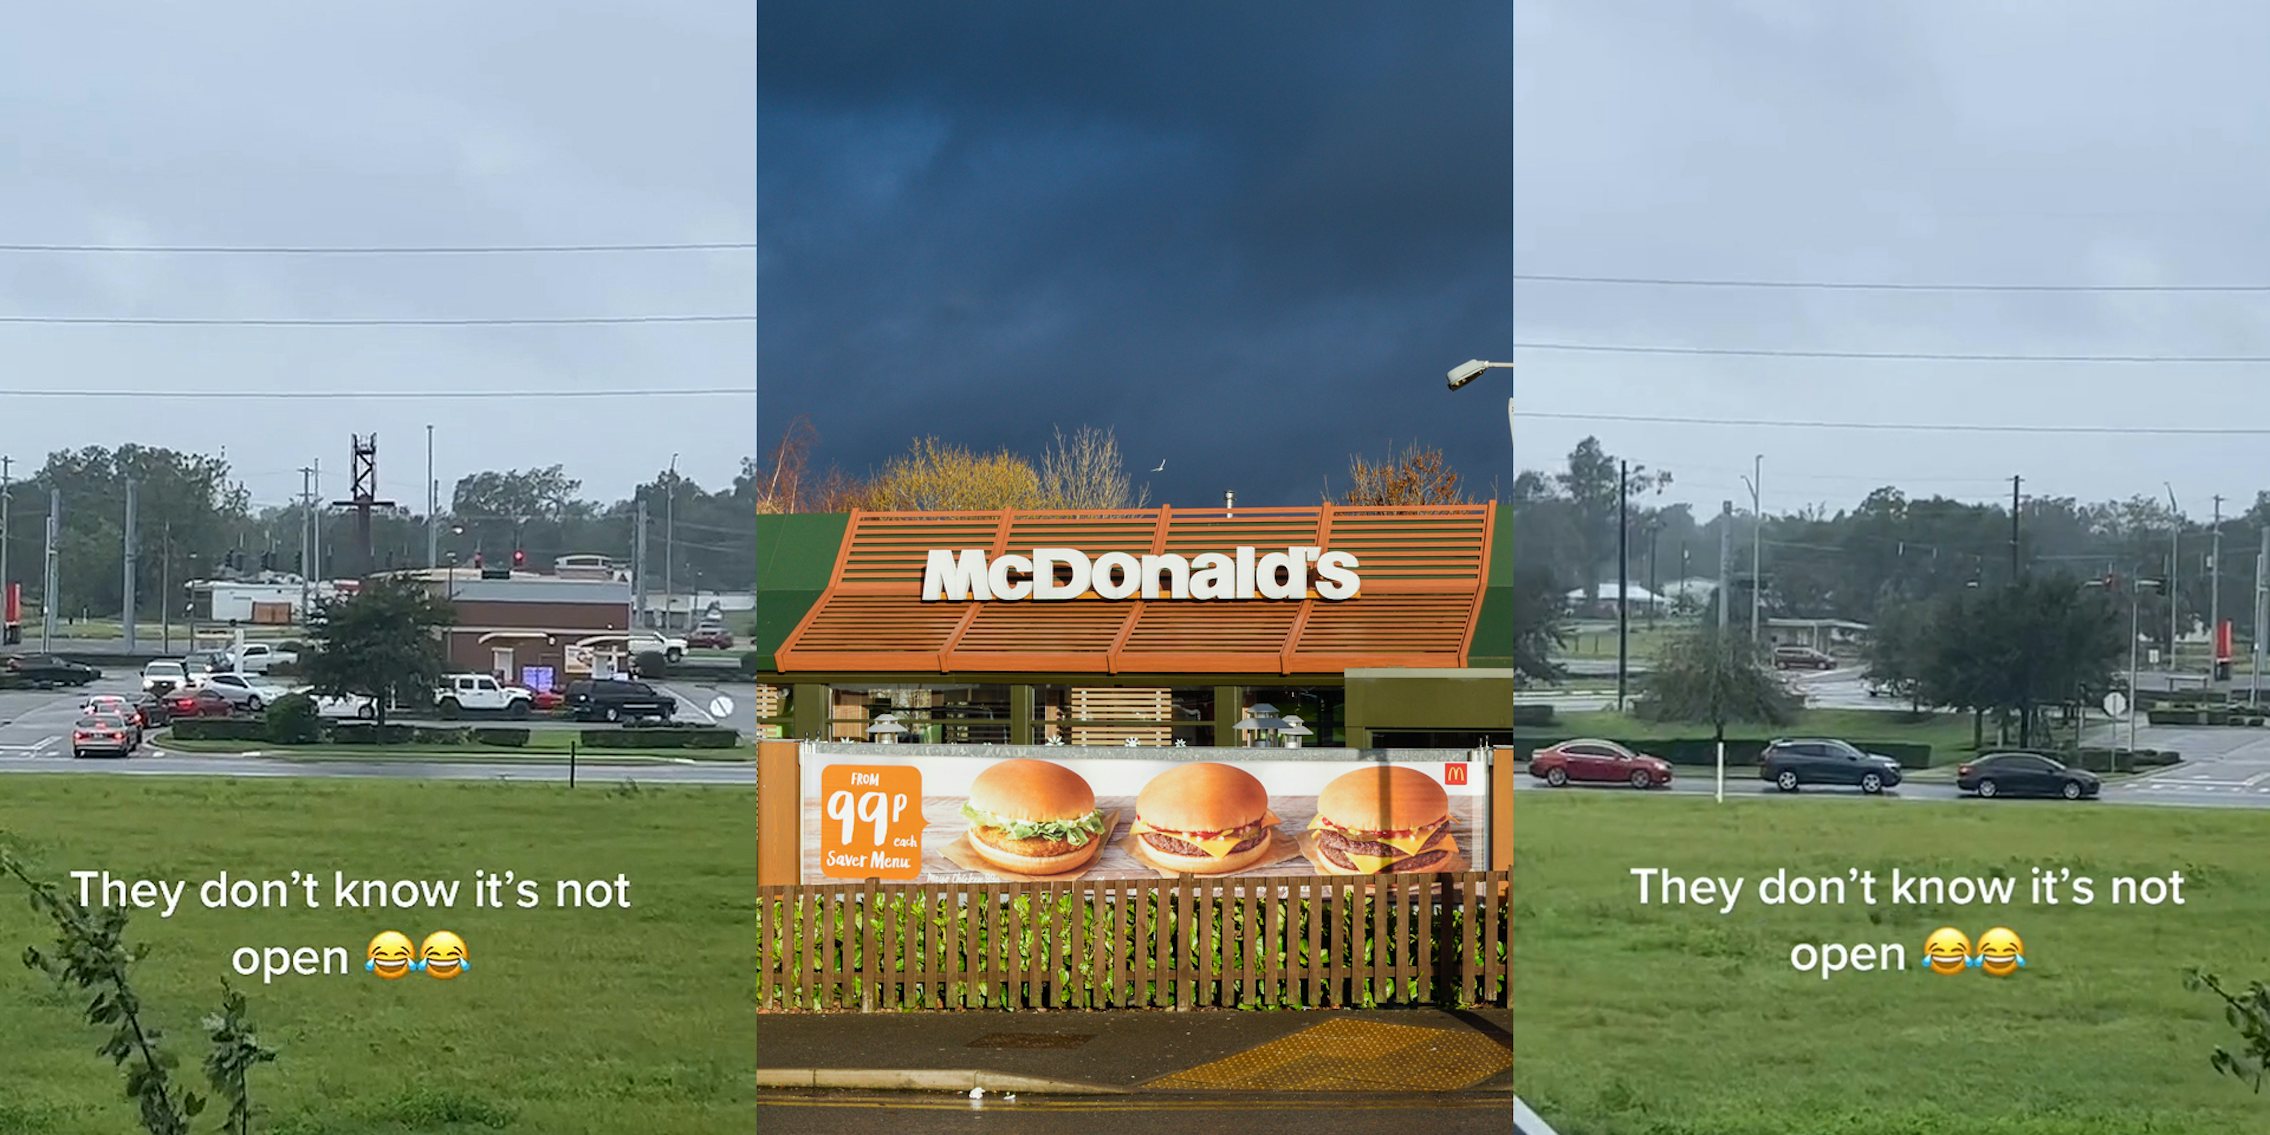 McDonald's during storm with long line of cars caption 'They don't know it's not open' (l) McDonald's building with sign and storm clouds (c) cars in line to closed McDonald's caption 'They don't know it's not open' (r)